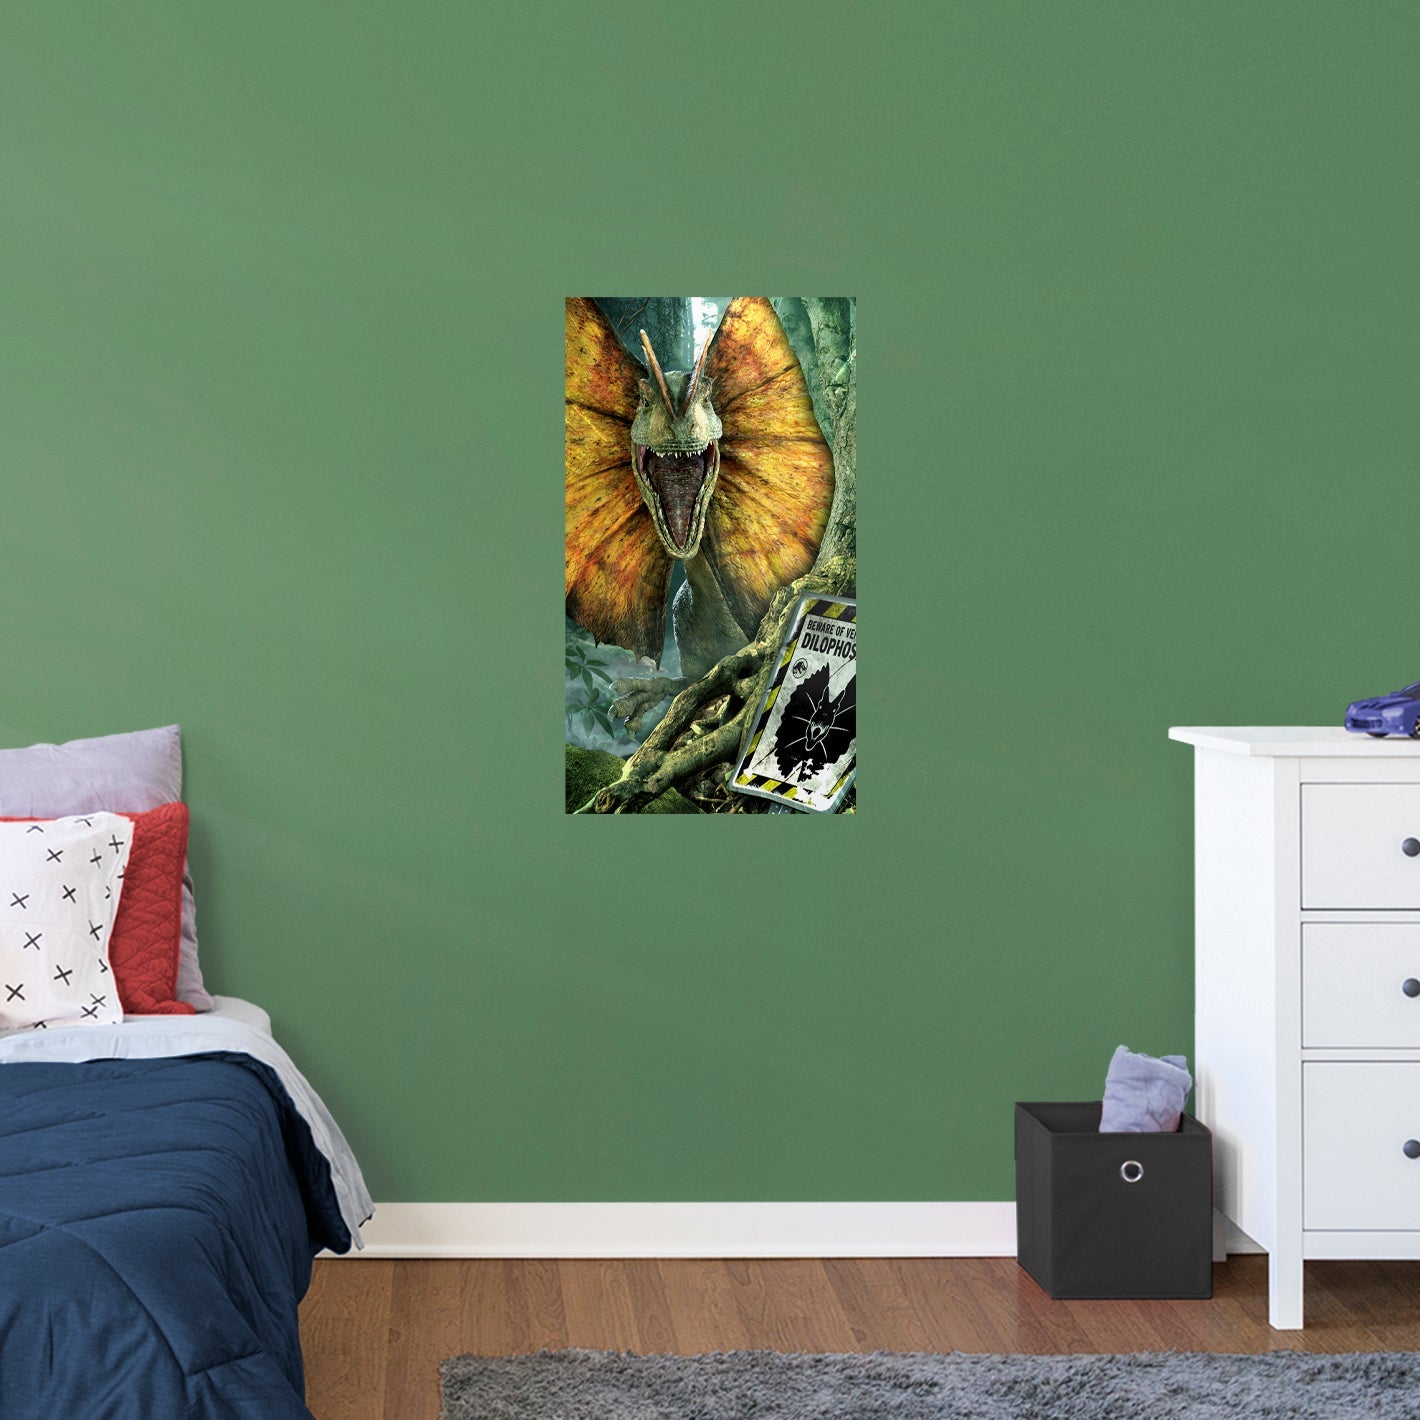 Jurassic World Dominion: Dilophosaurus Biosyn Forest Beware Poster - Officially Licensed NBC Universal Removable Adhesive Decal